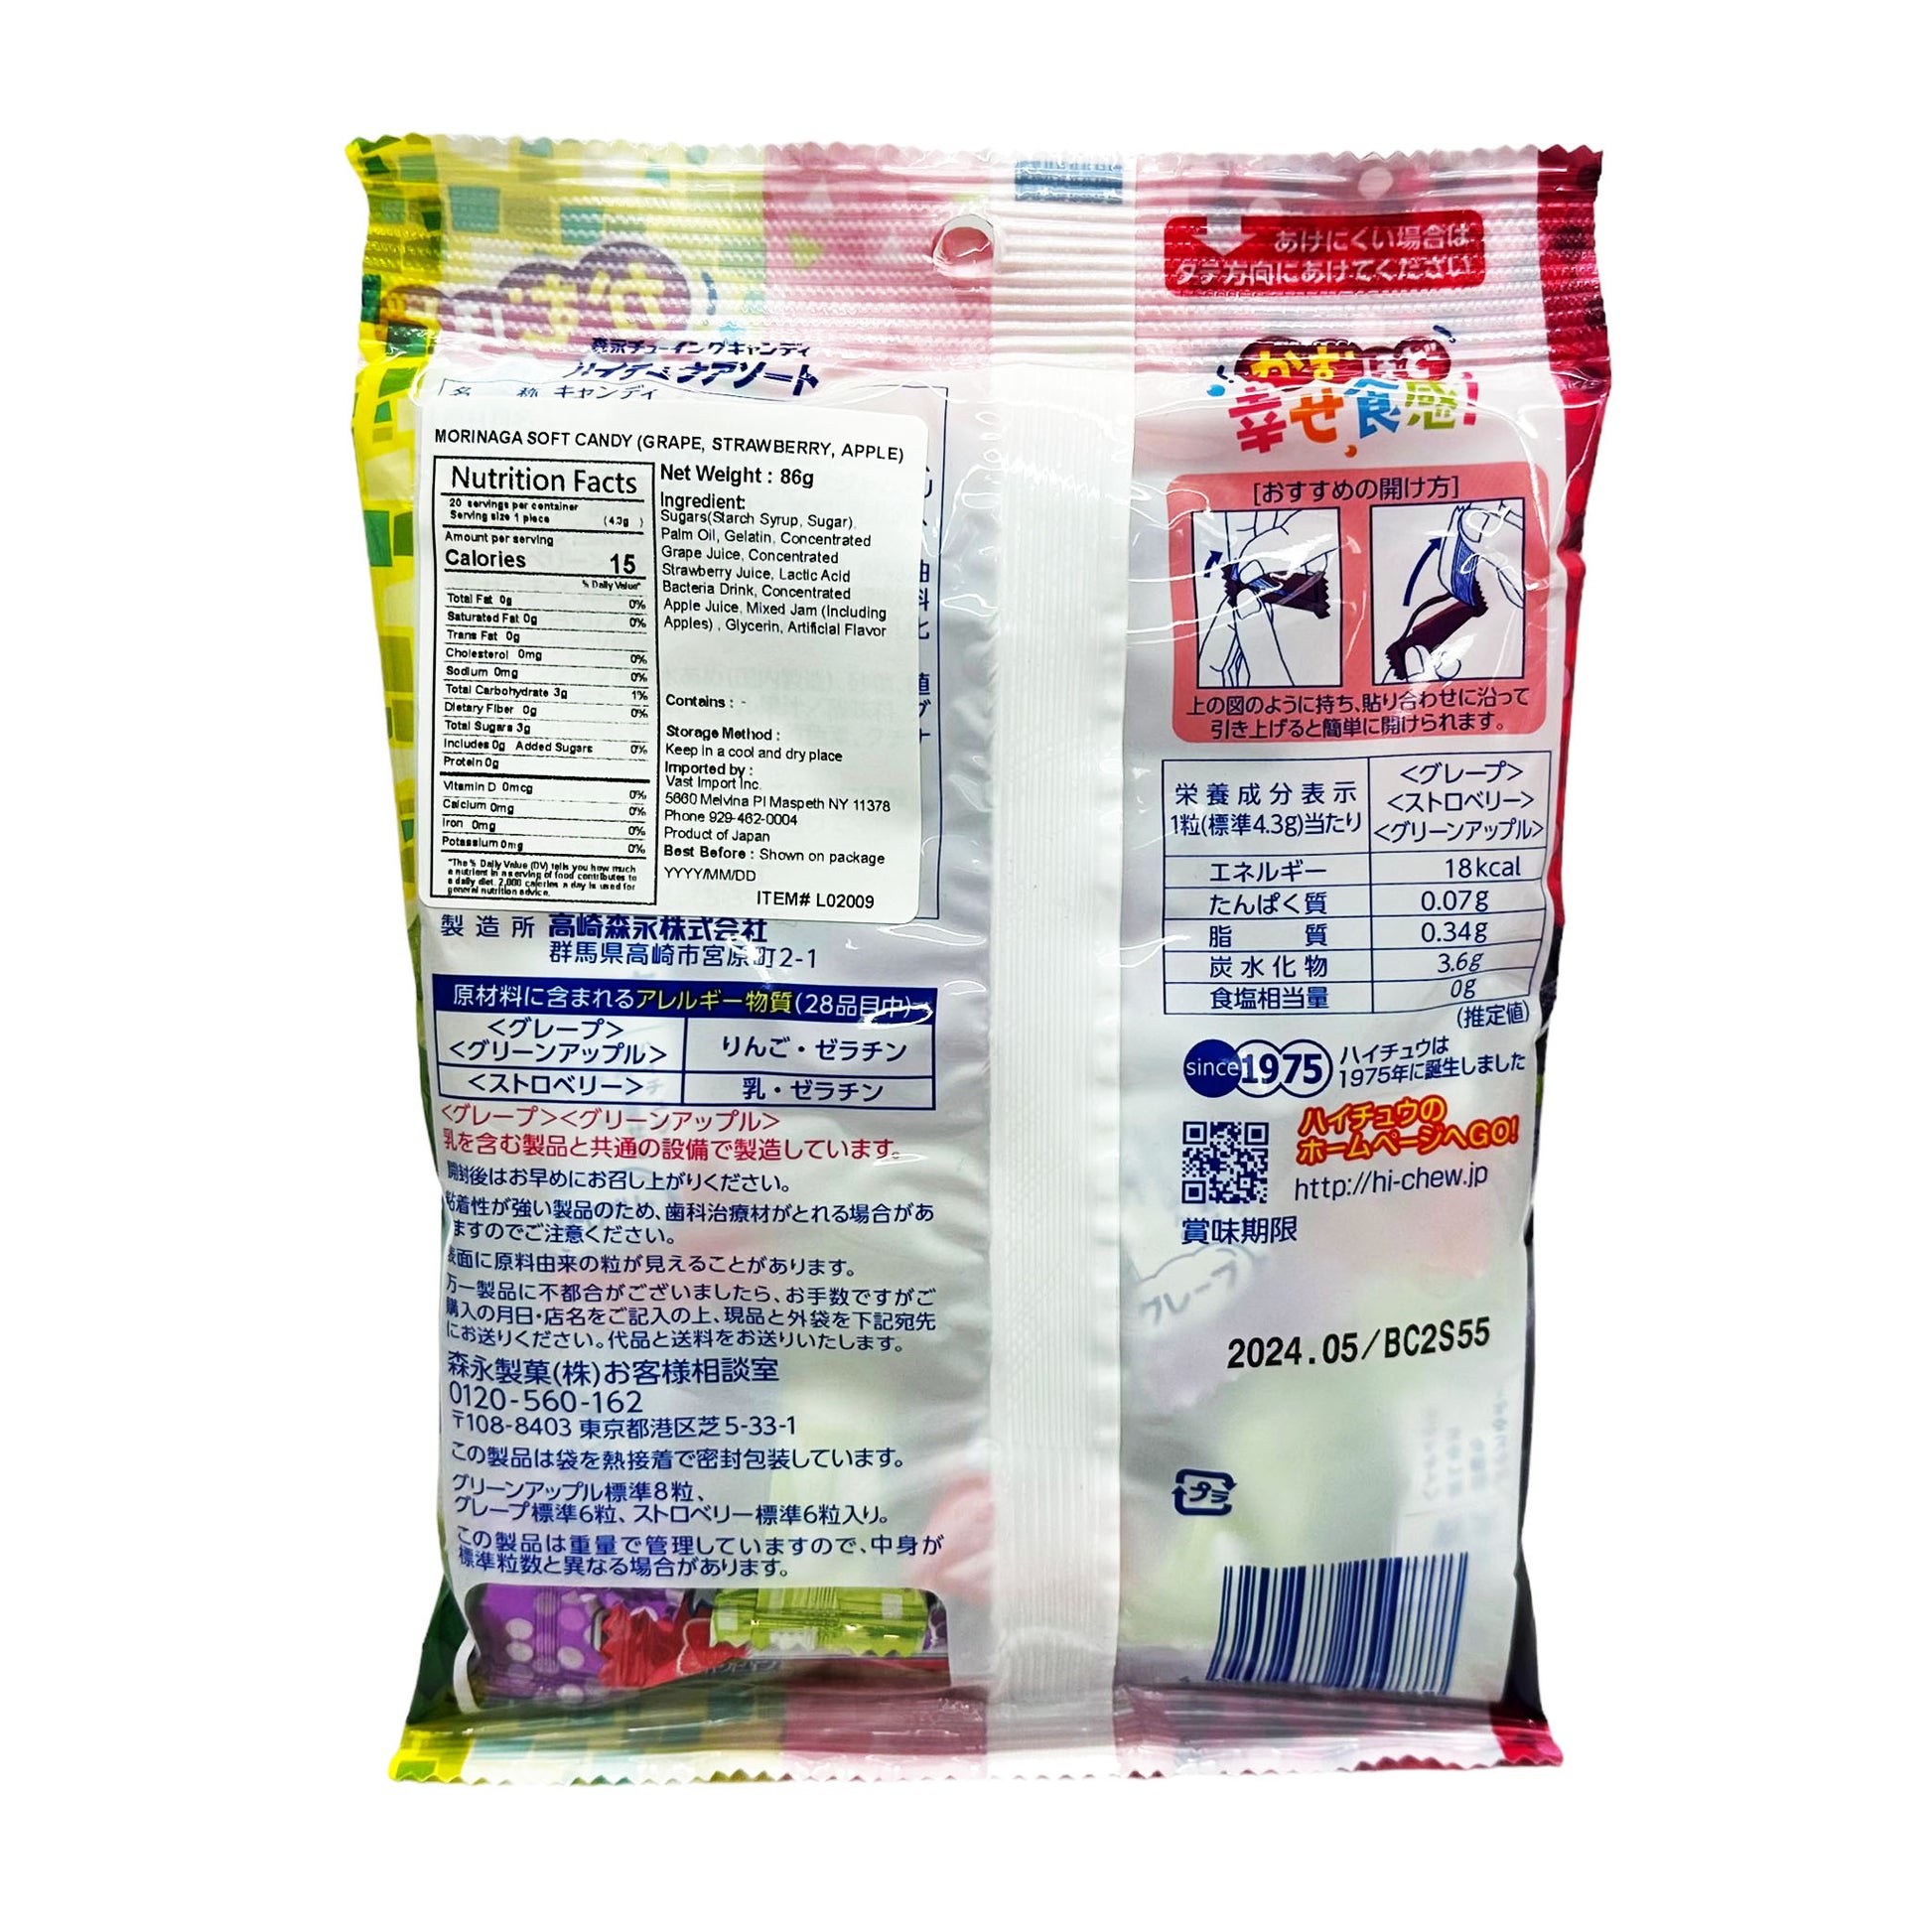 Back graphic image of Morinaga Hi-Chew Chewy Candy - Grape, Strawberry And Apple Flavor 3.03oz (86g)